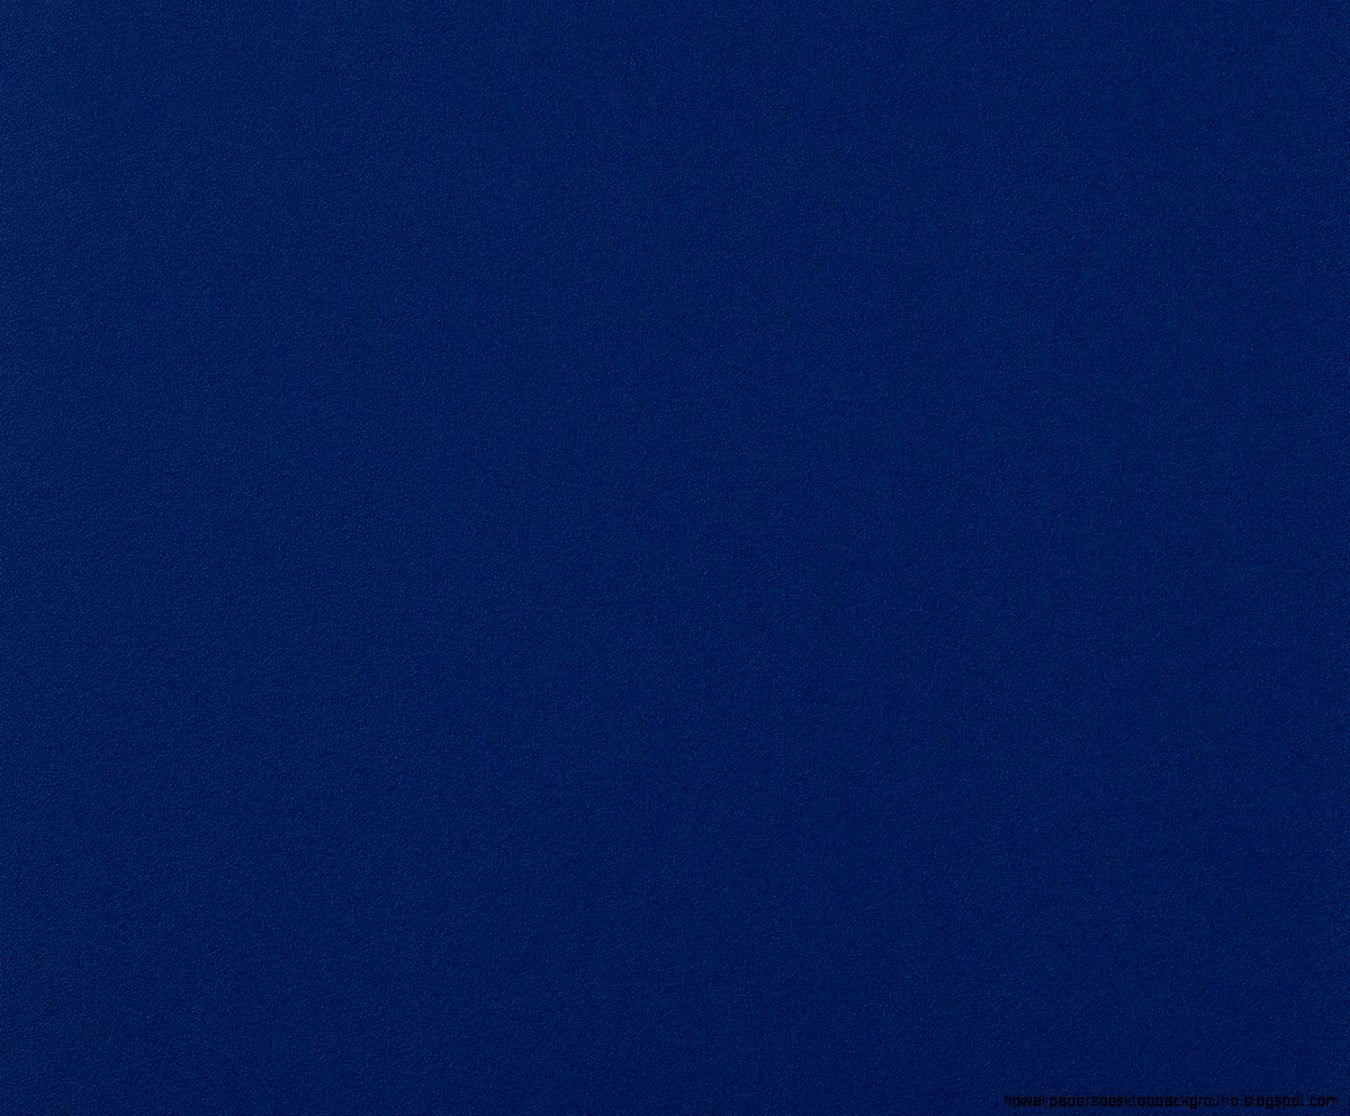 Plain Blue Wallpaper For Android All HD